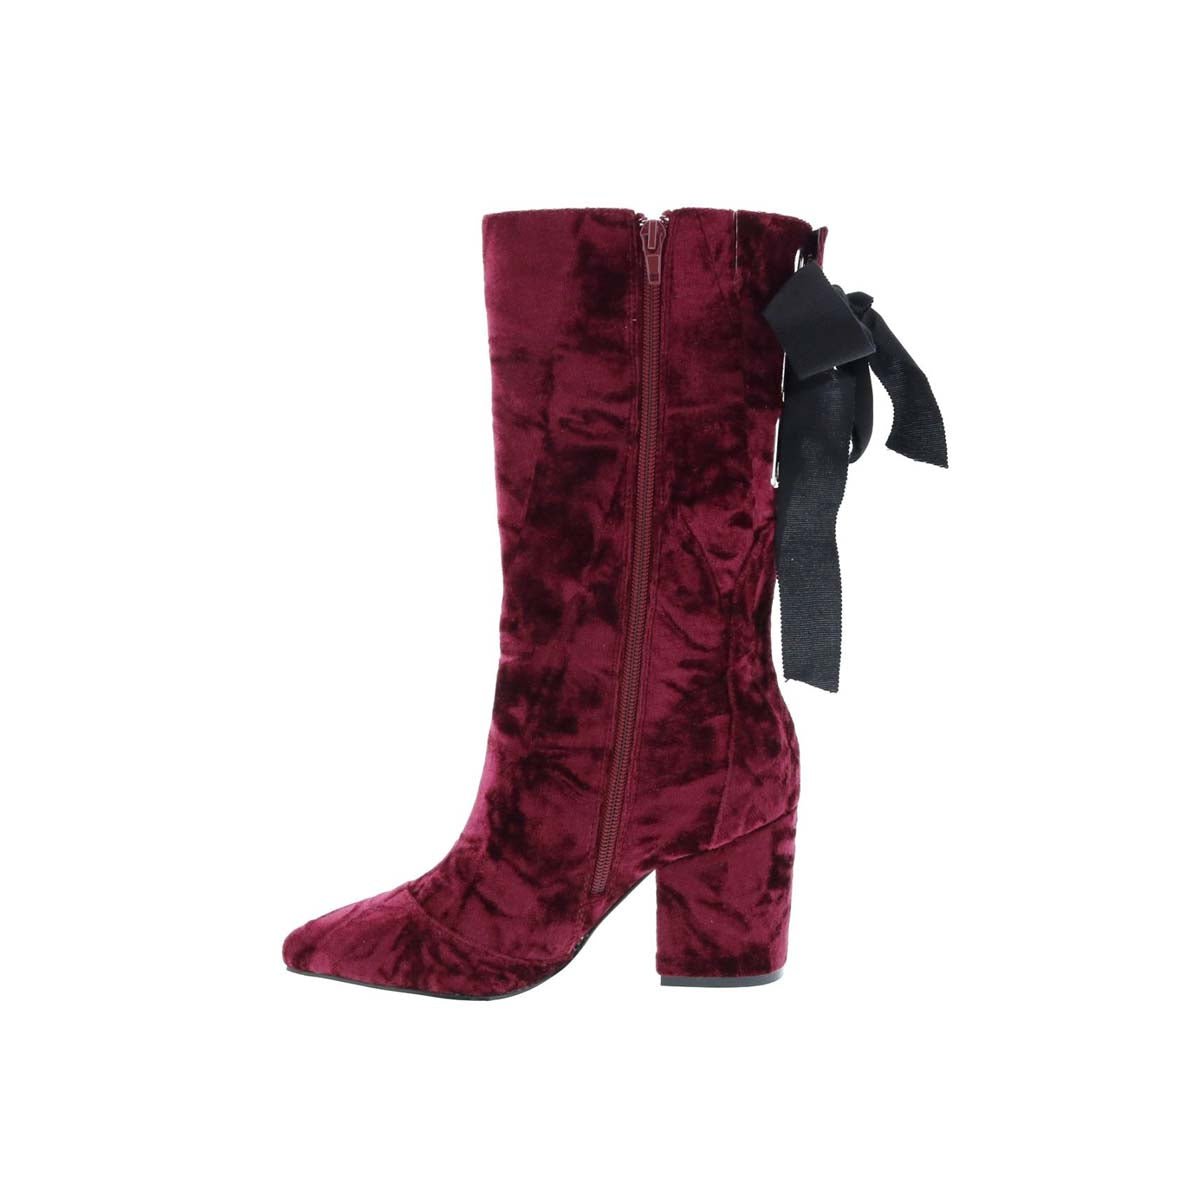 PENNY LOVES KENNY TRACE WOMEN BOOT IN WINE CRUSHED VELVET - TLW Shoes